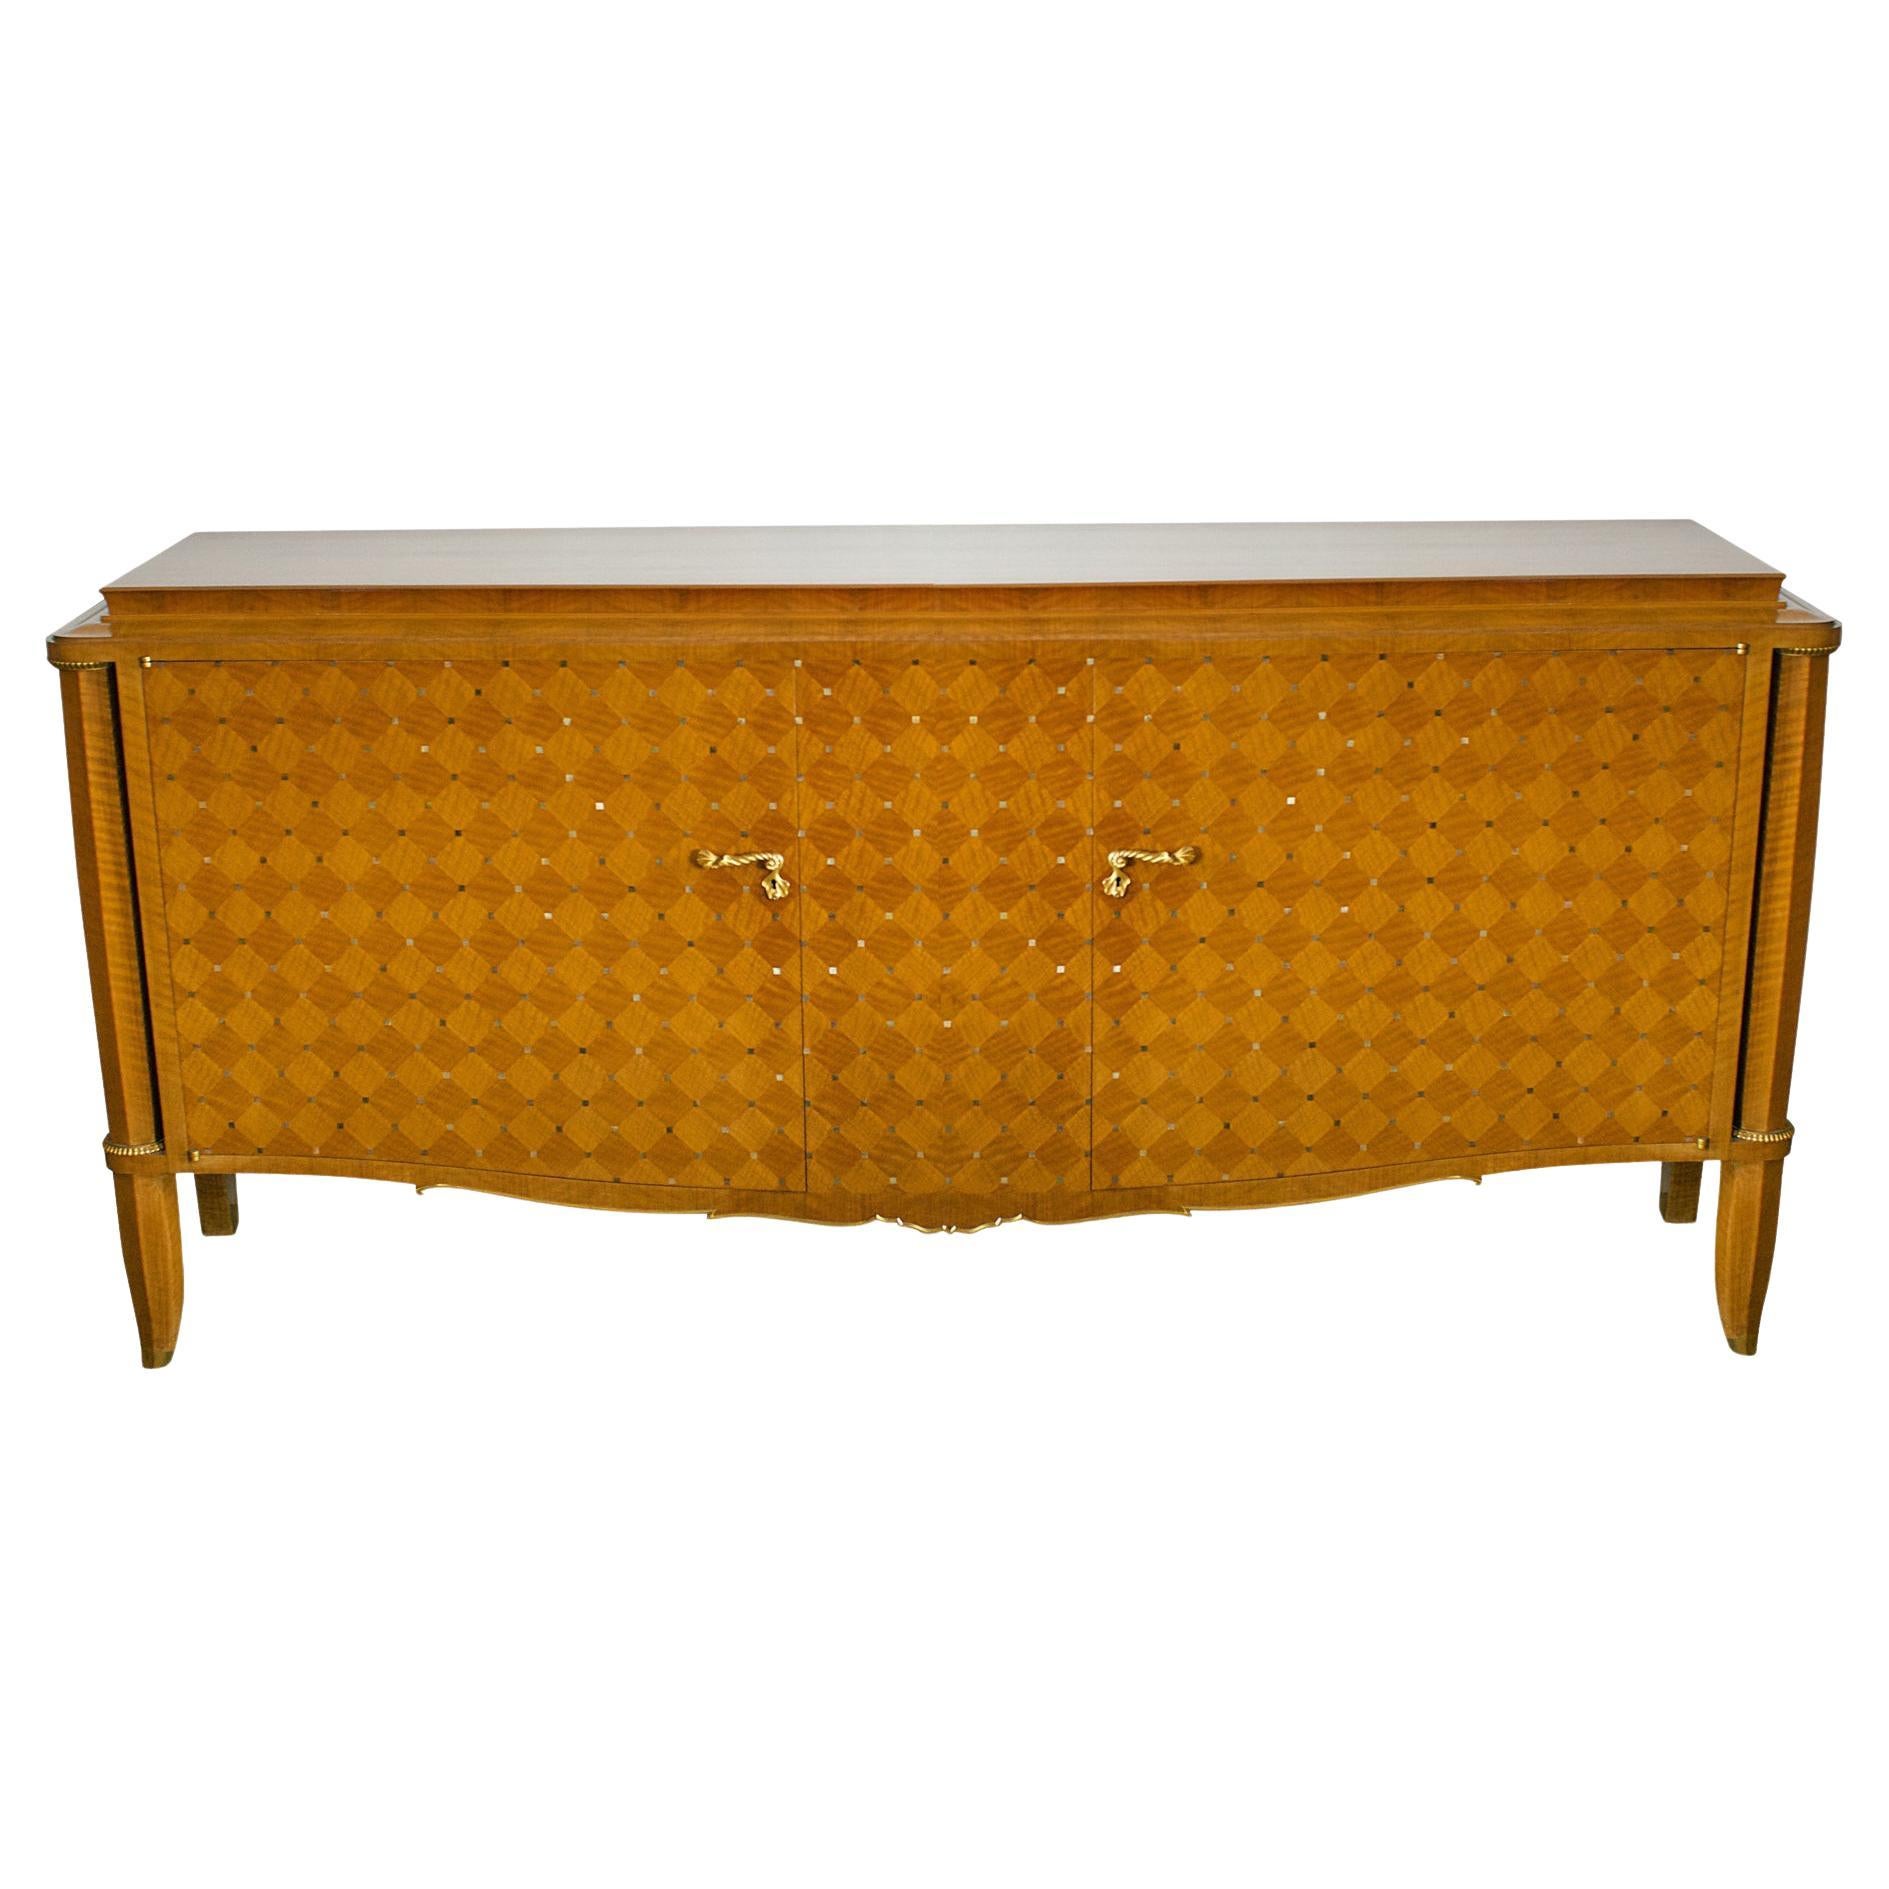 Important French Bronze, Walnut, Parquetry & Mother of Pearl Credenza, Jules Leleu